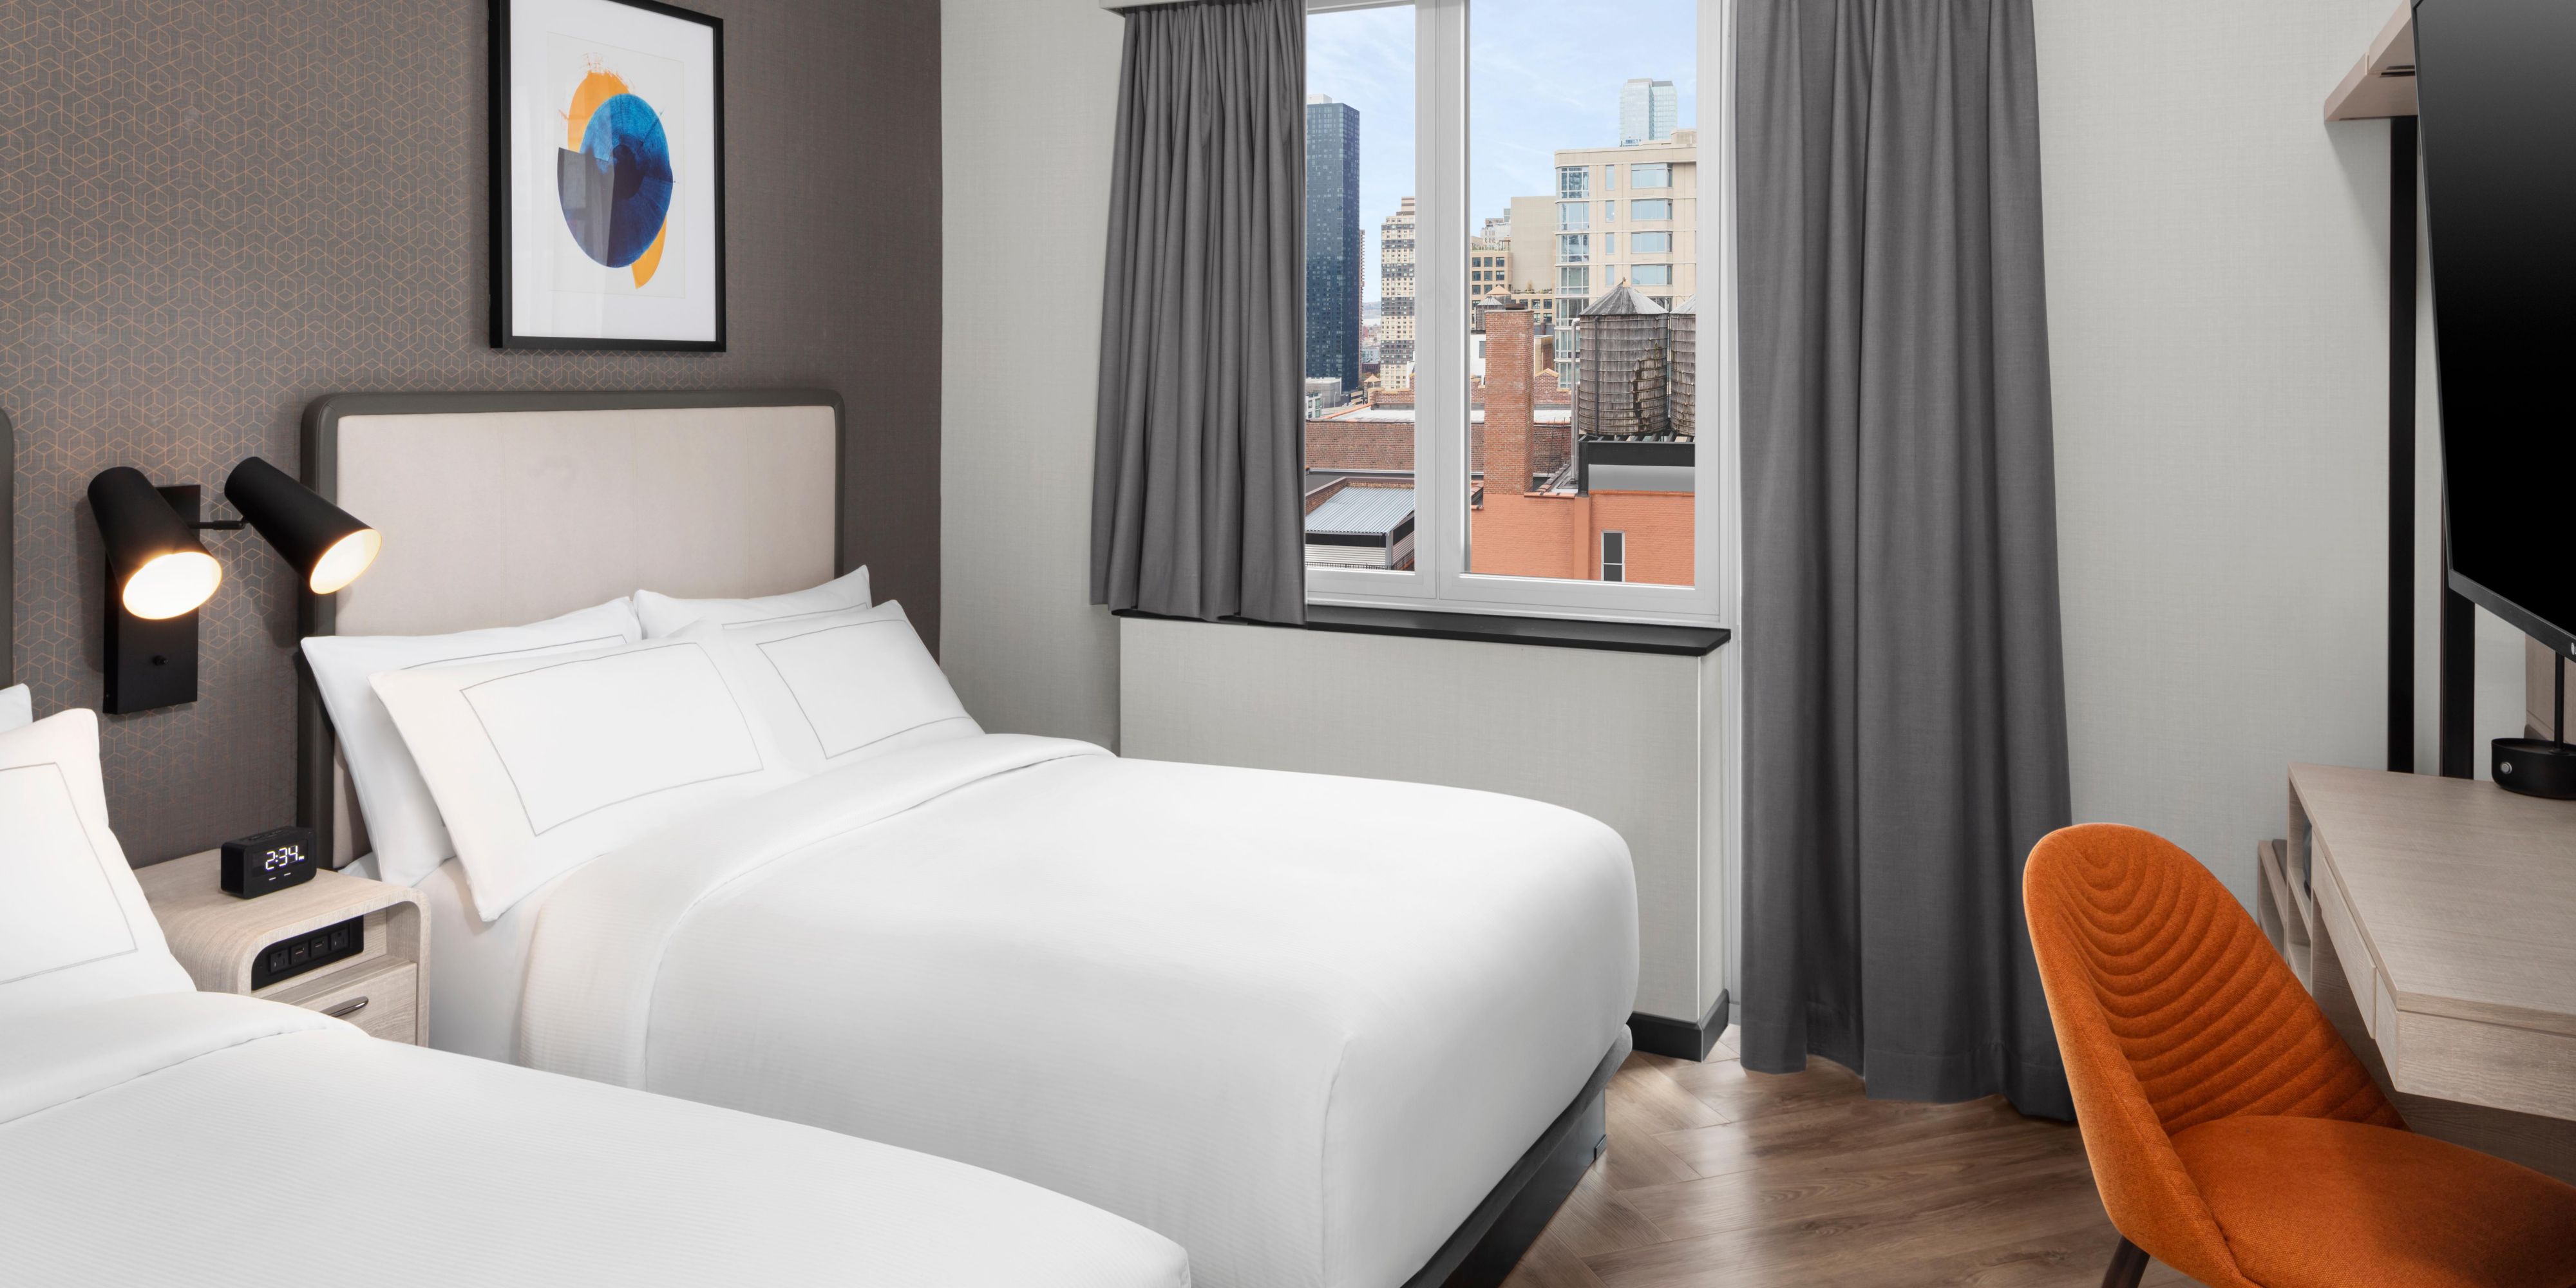 Book a Double Bed guest room with a view of New York City.